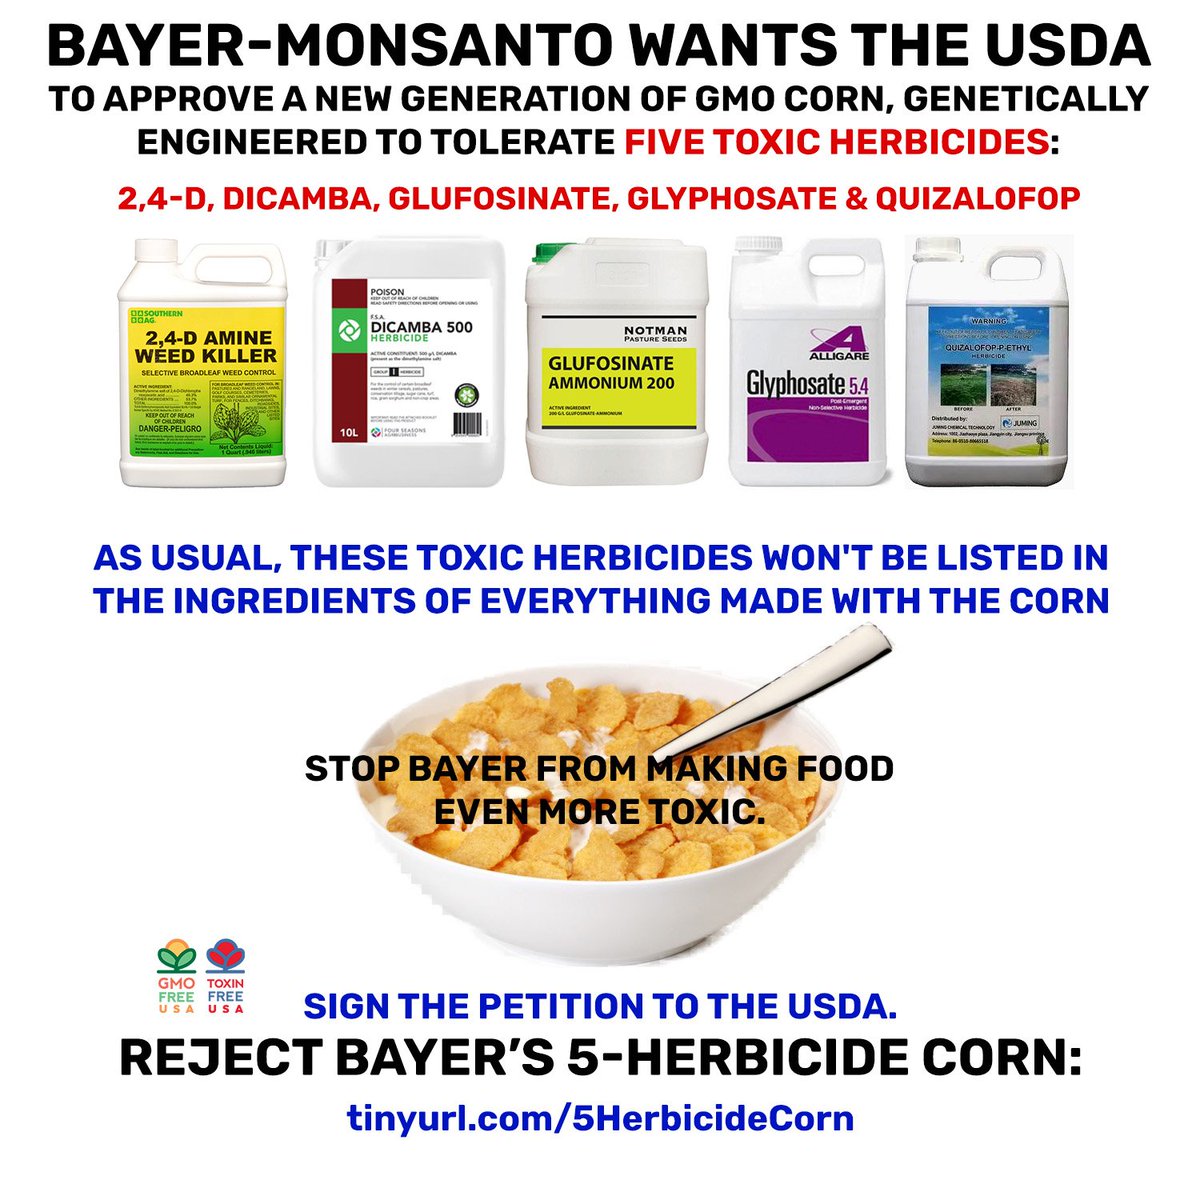 It was bad enough when Monsanto developed glyphosate-tolerant GMO corn. But now, Bayer-Monsanto wants to make four other toxic chemicals a widespread fact of life. READ more and tell the USDA to stop the madness. Reject Bayer's toxic 5-herbicide corn: tinyurl.com/5HerbicideCorn